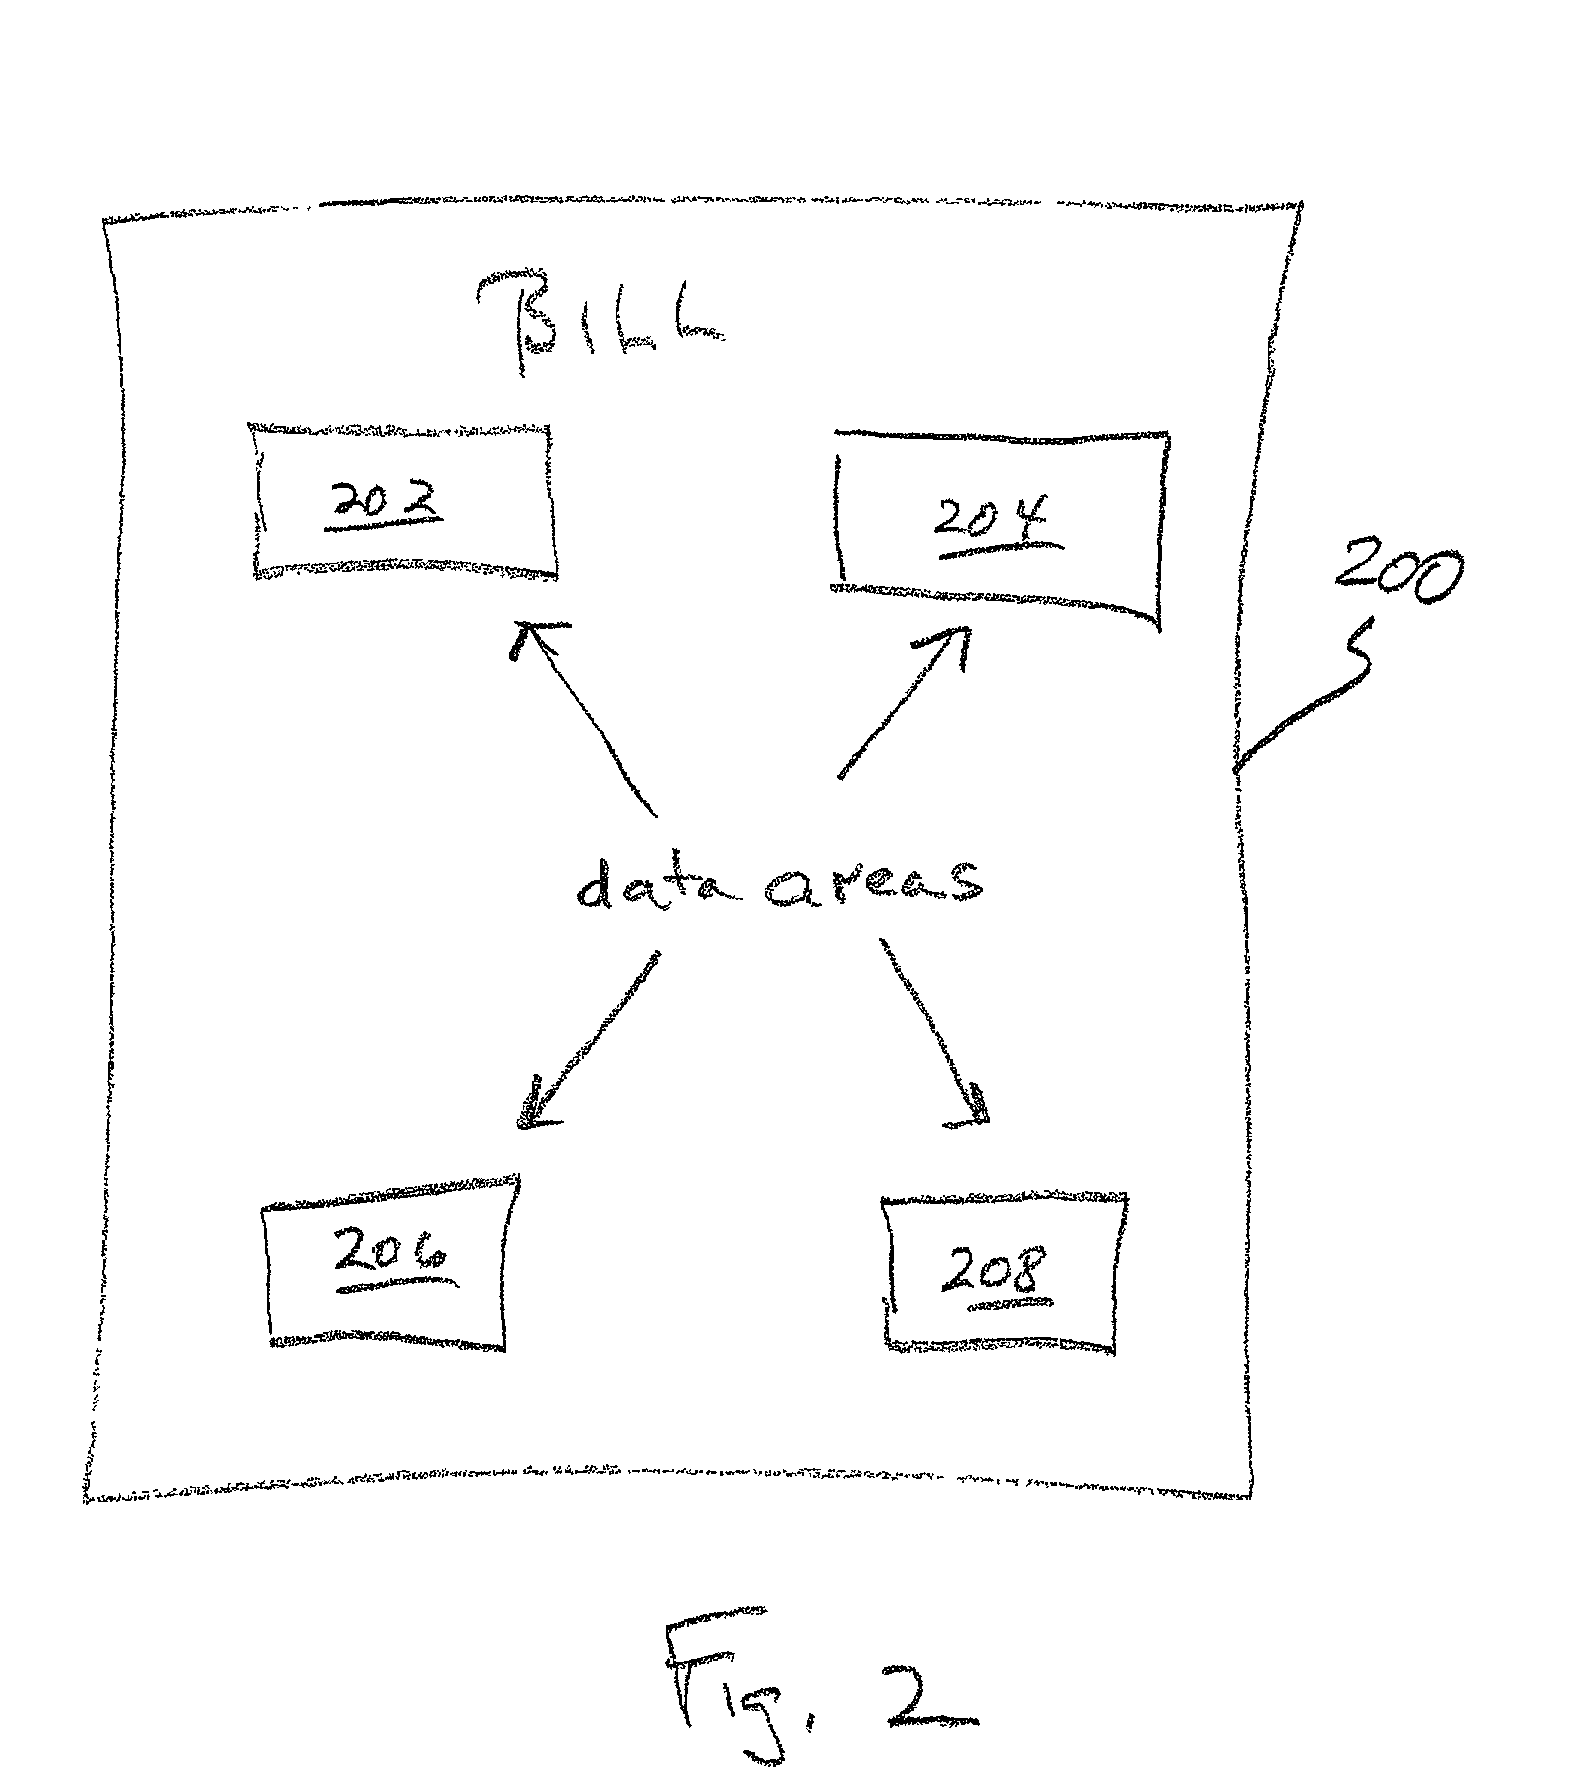 System and method for automatic bill payment